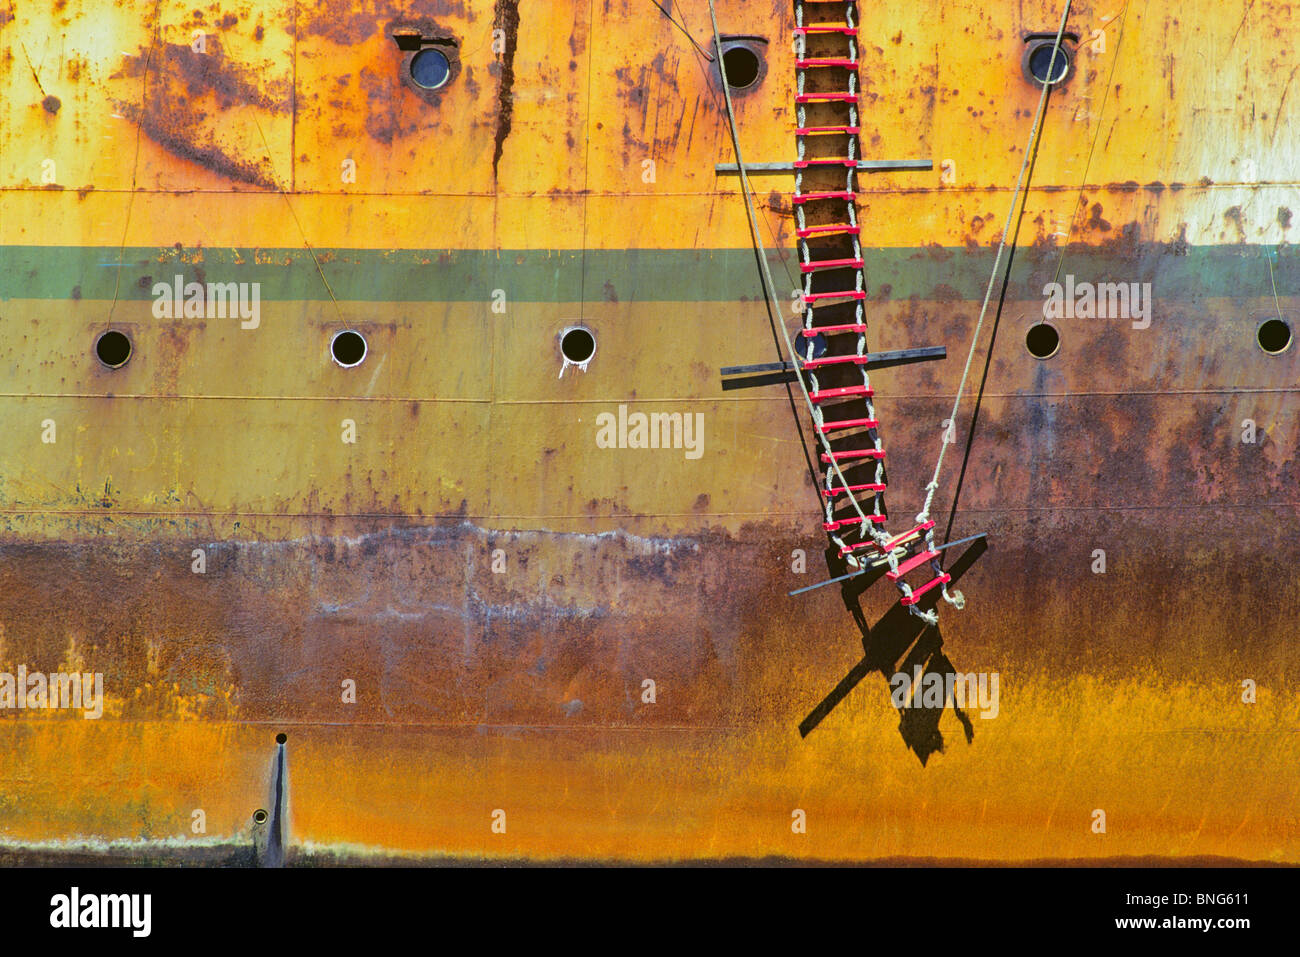 Rope ladder hanging on a rusty container ship, Victoria, Vancouver Island, British Columbia, Canada Stock Photo